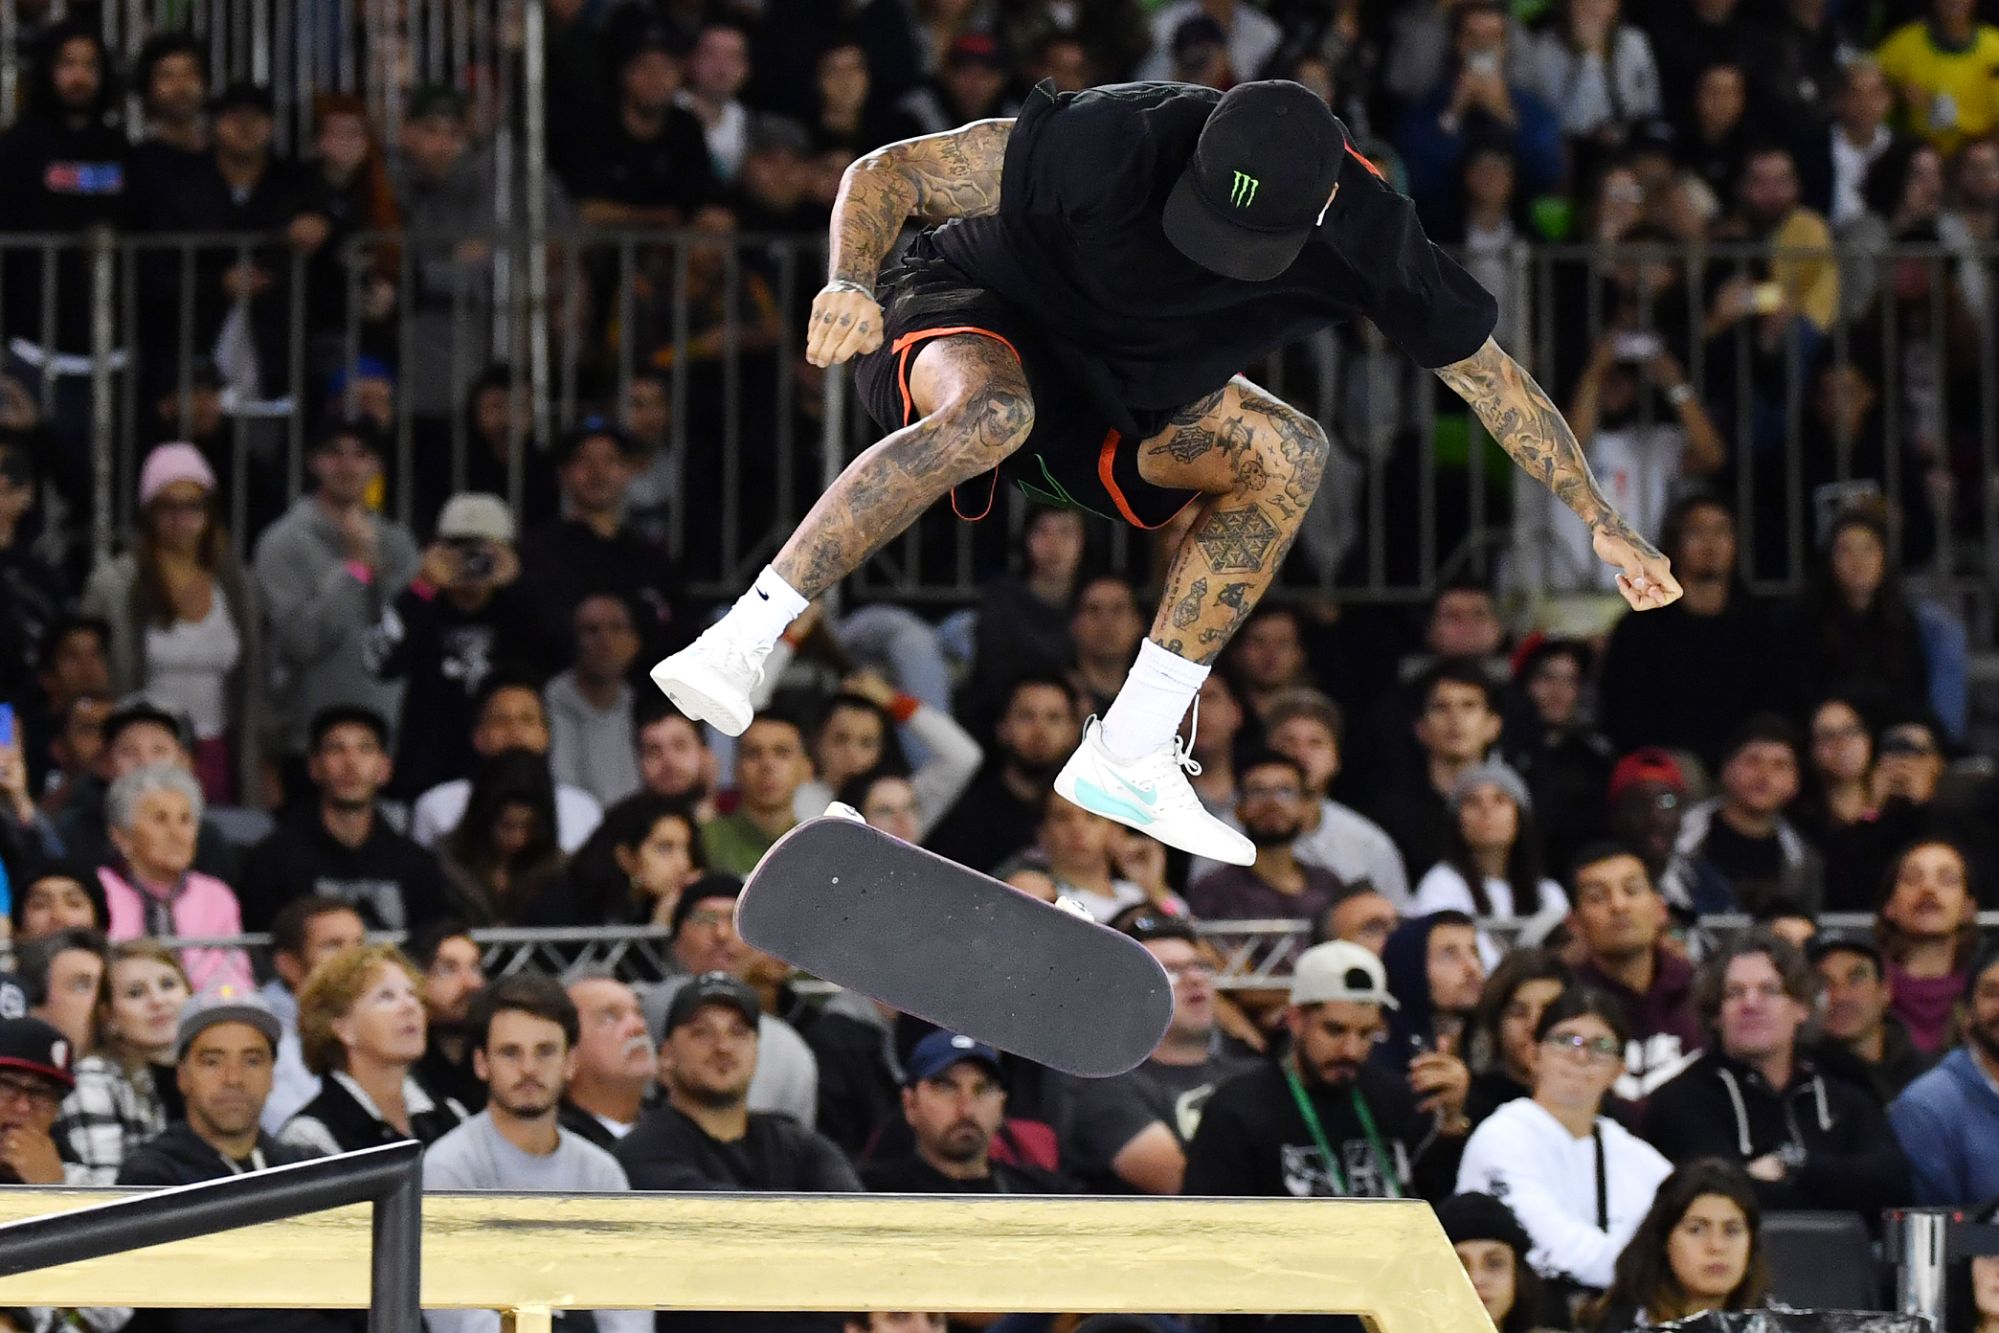 Skateboarder Nyjah Huston On Going To The Olympics Im Stoked 